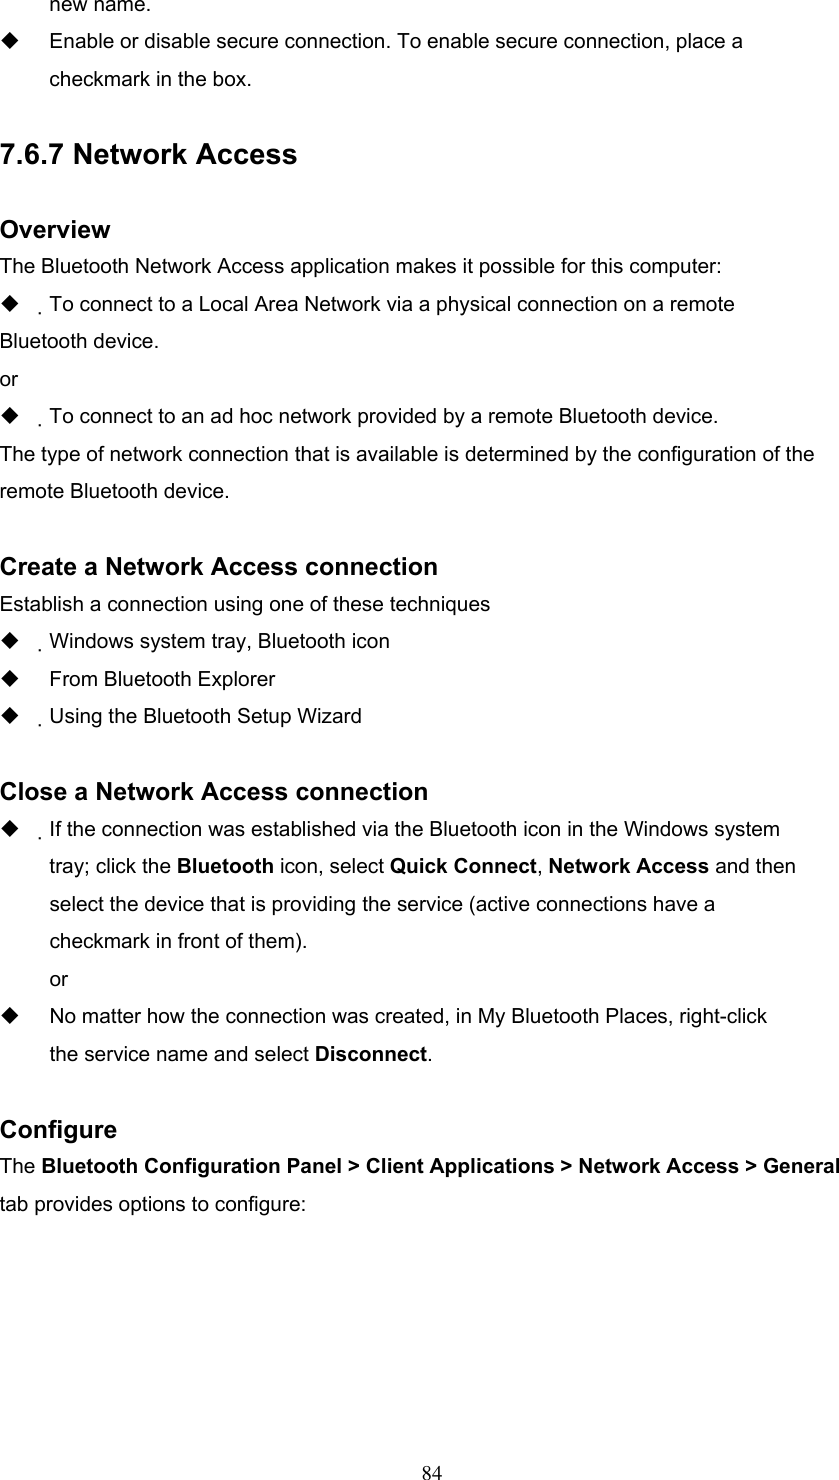 new name.   Enable or disable secure connection. To enable secure connection, place a checkmark in the box.  7.6.7 Network Access  Overview The Bluetooth Network Access application makes it possible for this computer:   To connect to a Local Area Network via a physical connection on a remote Bluetooth device. or   To connect to an ad hoc network provided by a remote Bluetooth device. The type of network connection that is available is determined by the configuration of the remote Bluetooth device.  Create a Network Access connection Establish a connection using one of these techniques   Windows system tray, Bluetooth icon   From Bluetooth Explorer   Using the Bluetooth Setup Wizard  Close a Network Access connection   If the connection was established via the Bluetooth icon in the Windows system tray; click the Bluetooth icon, select Quick Connect, Network Access and then select the device that is providing the service (active connections have a checkmark in front of them). or   No matter how the connection was created, in My Bluetooth Places, right-click the service name and select Disconnect.  Configure The Bluetooth Configuration Panel &gt; Client Applications &gt; Network Access &gt; General tab provides options to configure:  84 